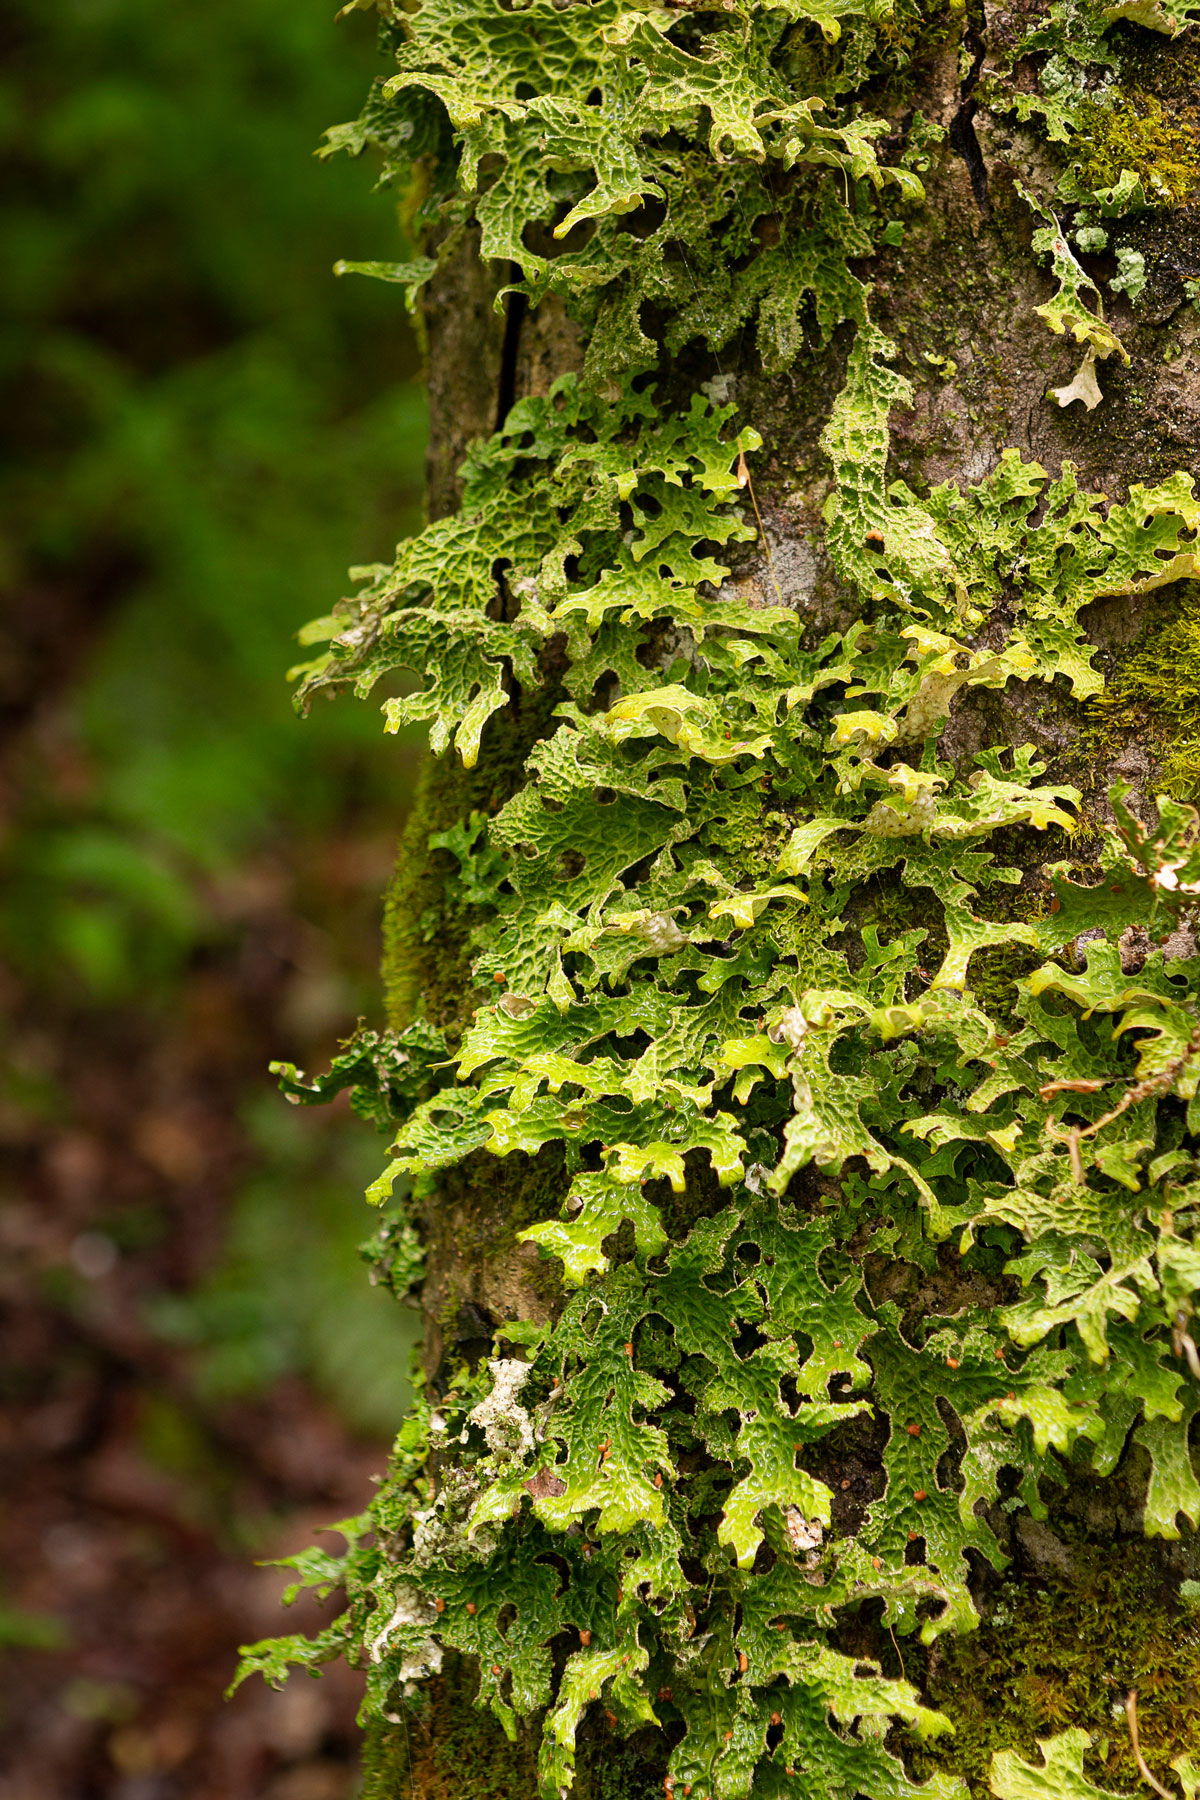 A single old-growth tree can provide habitat for hundreds of species of insects and dozens of fungi, slime molds, mosses, ferns, and lichens like this lungwort. Image courtesy of Michele Sons.